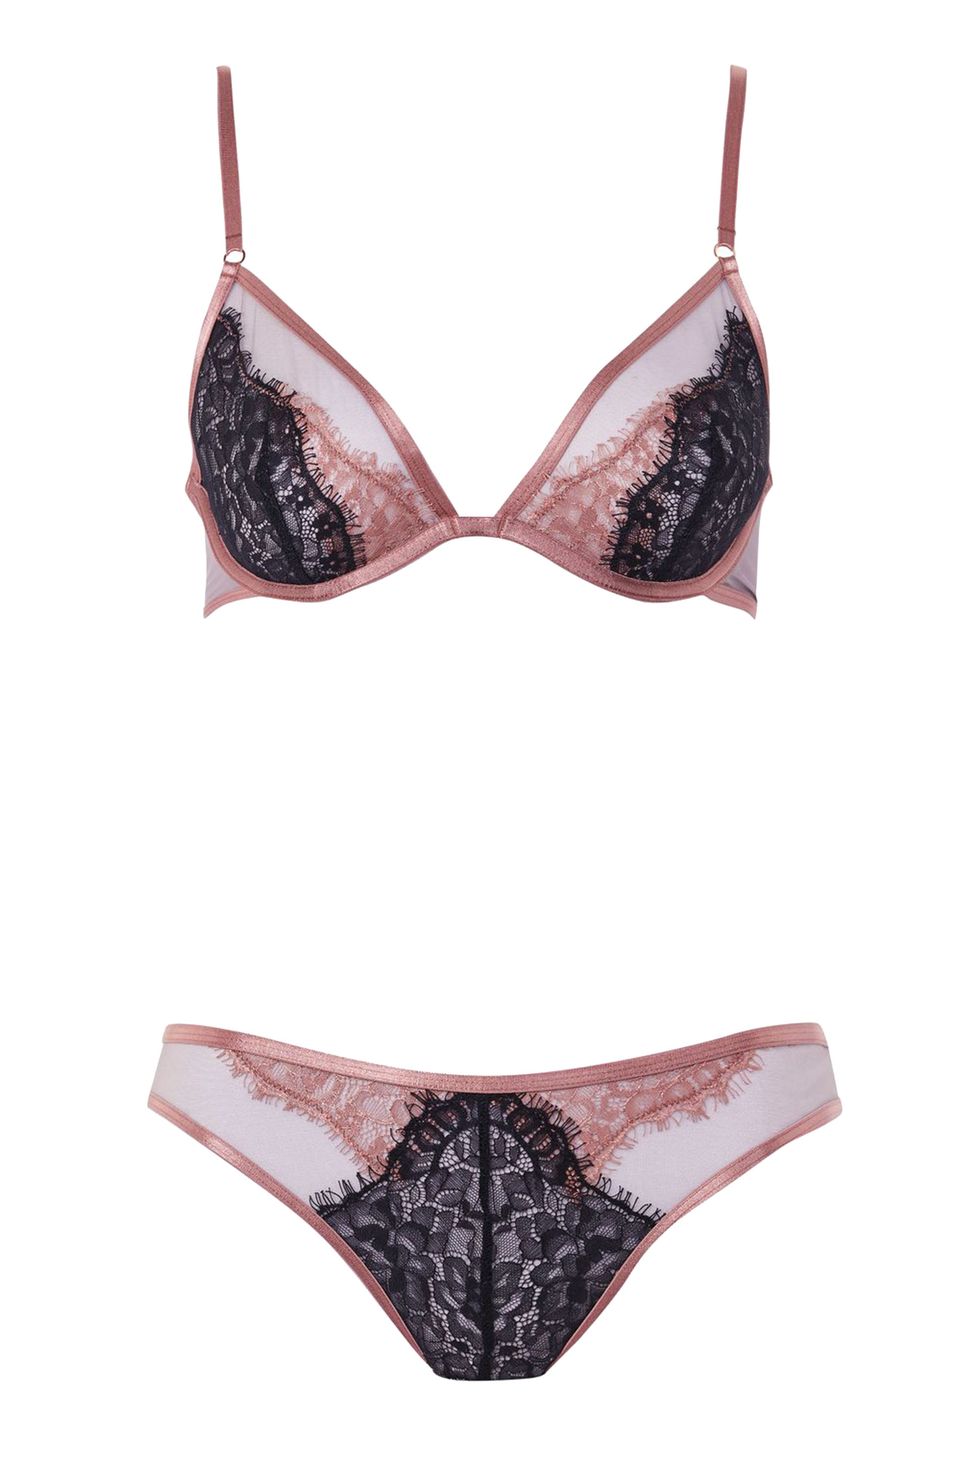 Best Valentine's Day lingerie: 22 of the sexiest outfits to buy